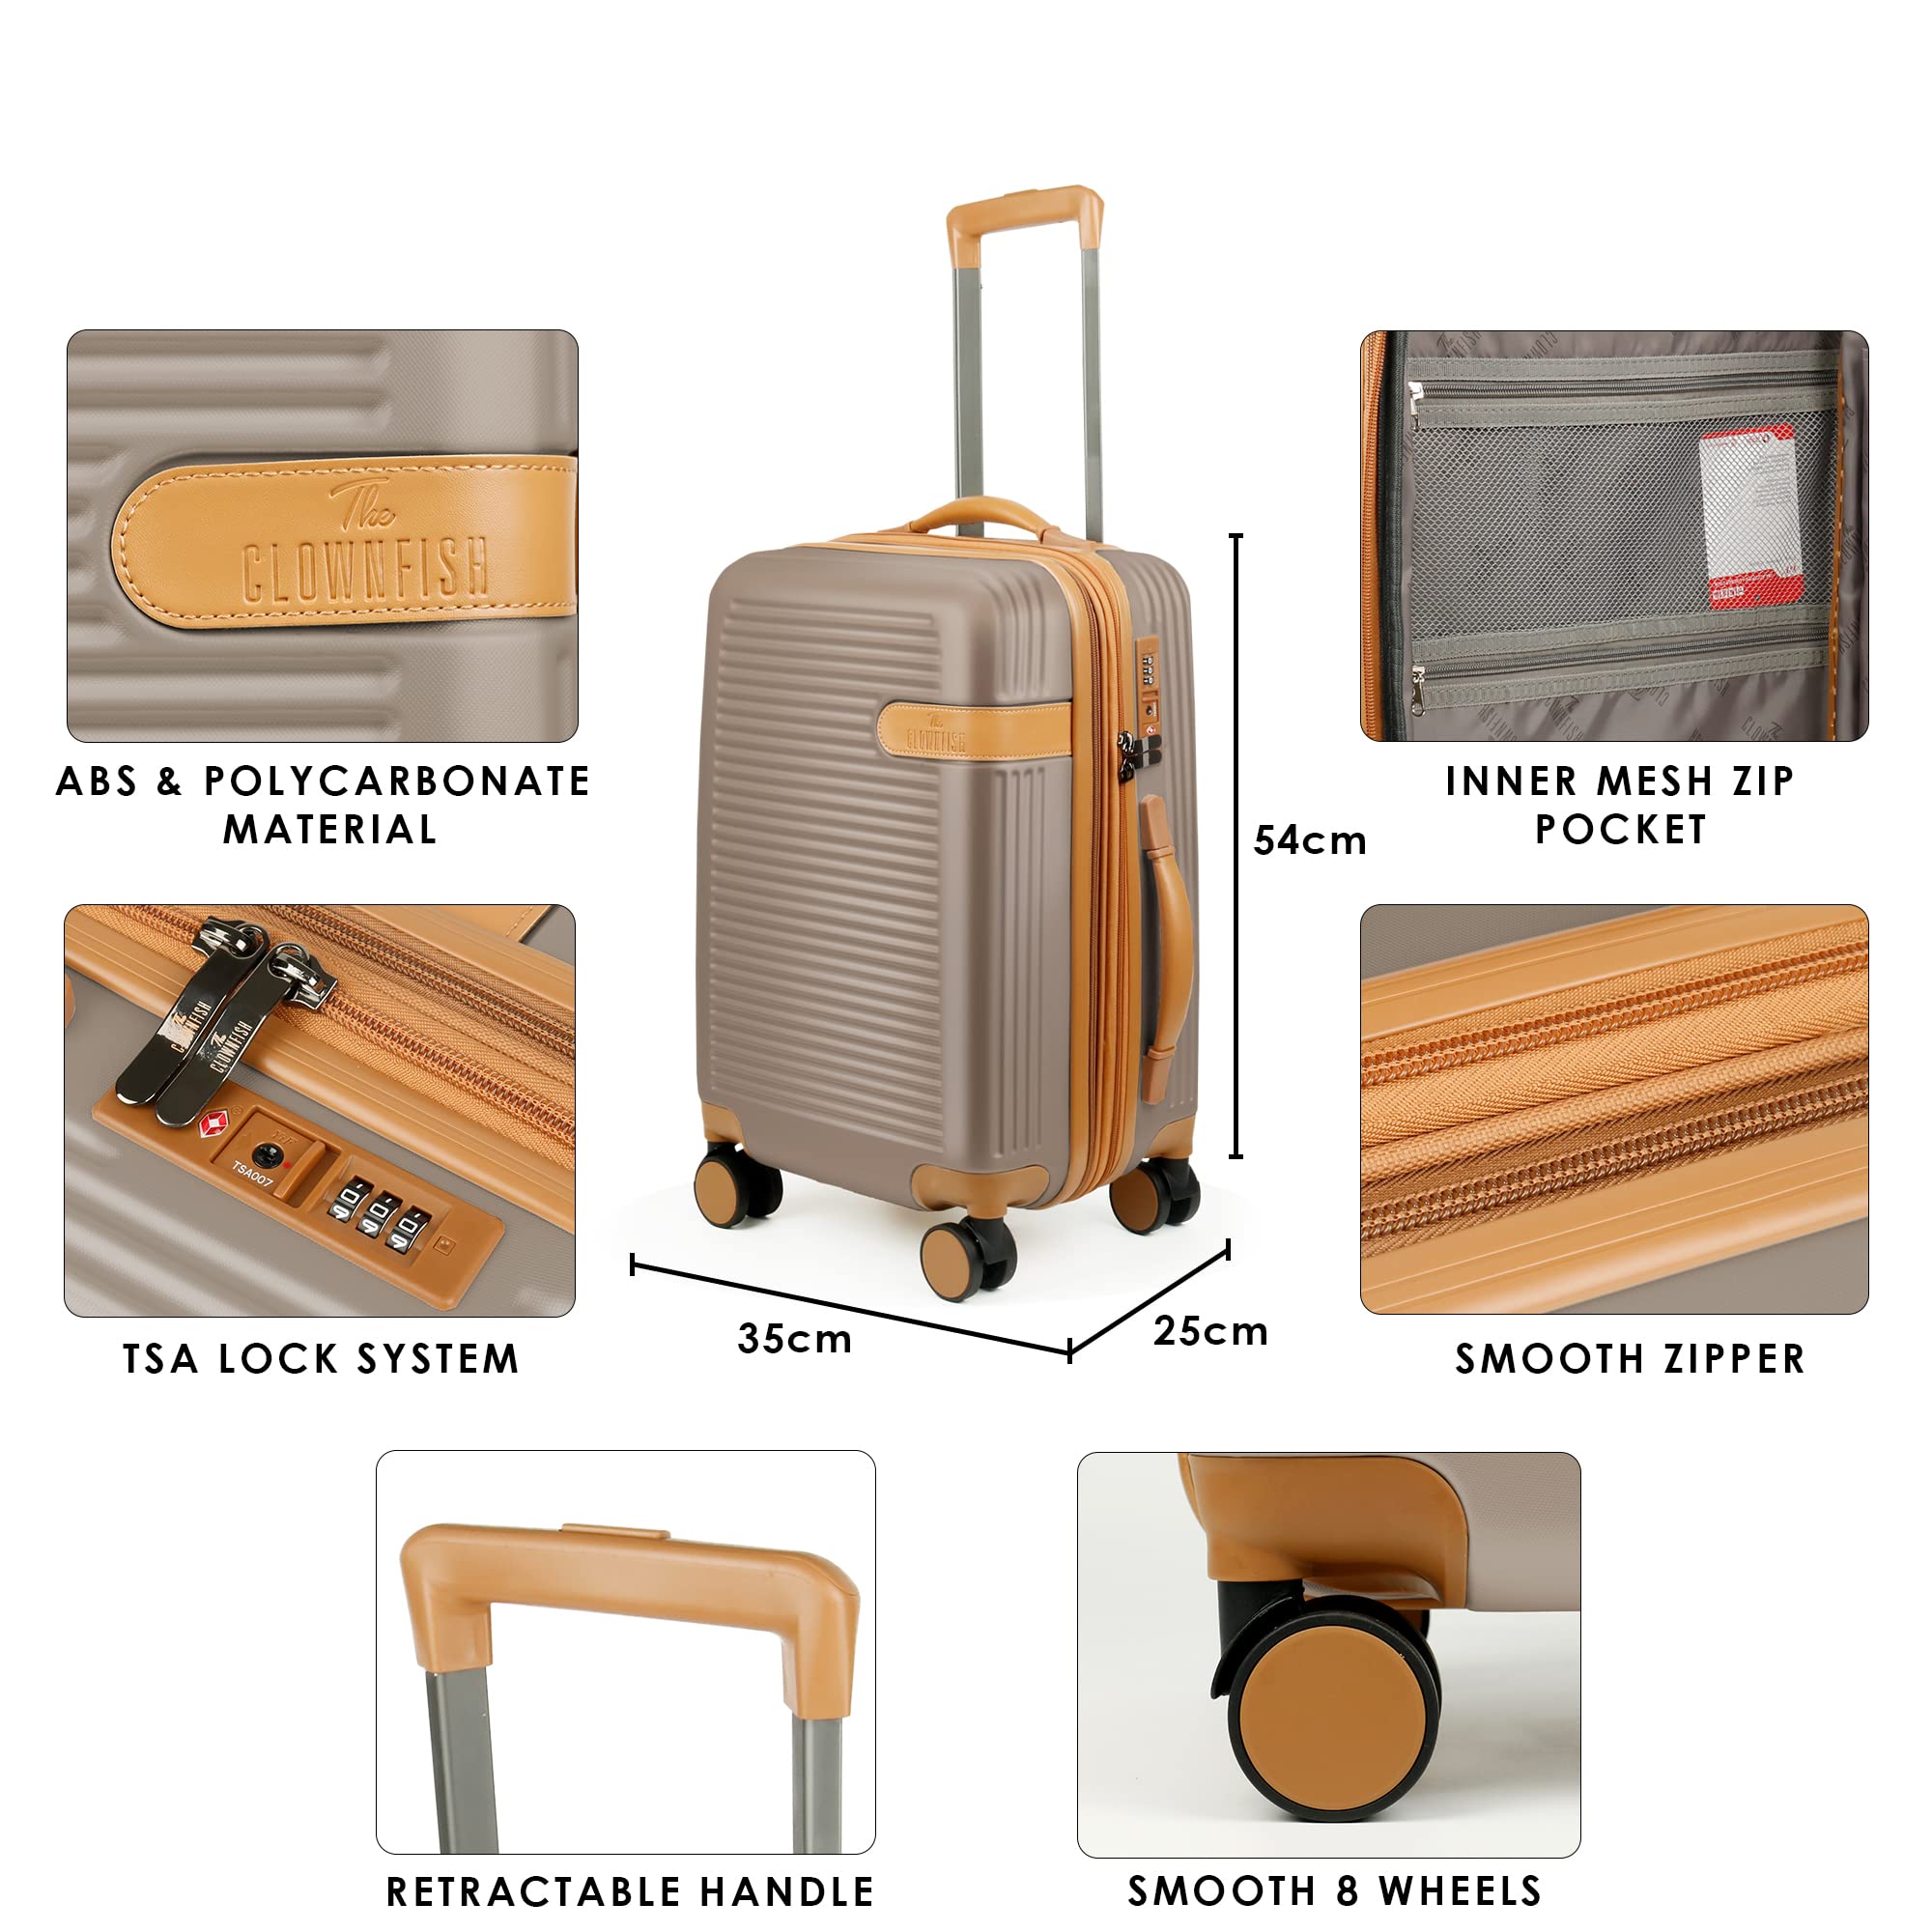 THE CLOWNFISH Kenzo Series Expandable Luggage ABS Polycarbonate Exterior  Hard Case Suitcase Eight Wheel Trolley Bag With TSA Lock- Champagne (Small, Expandable Small Suitcase